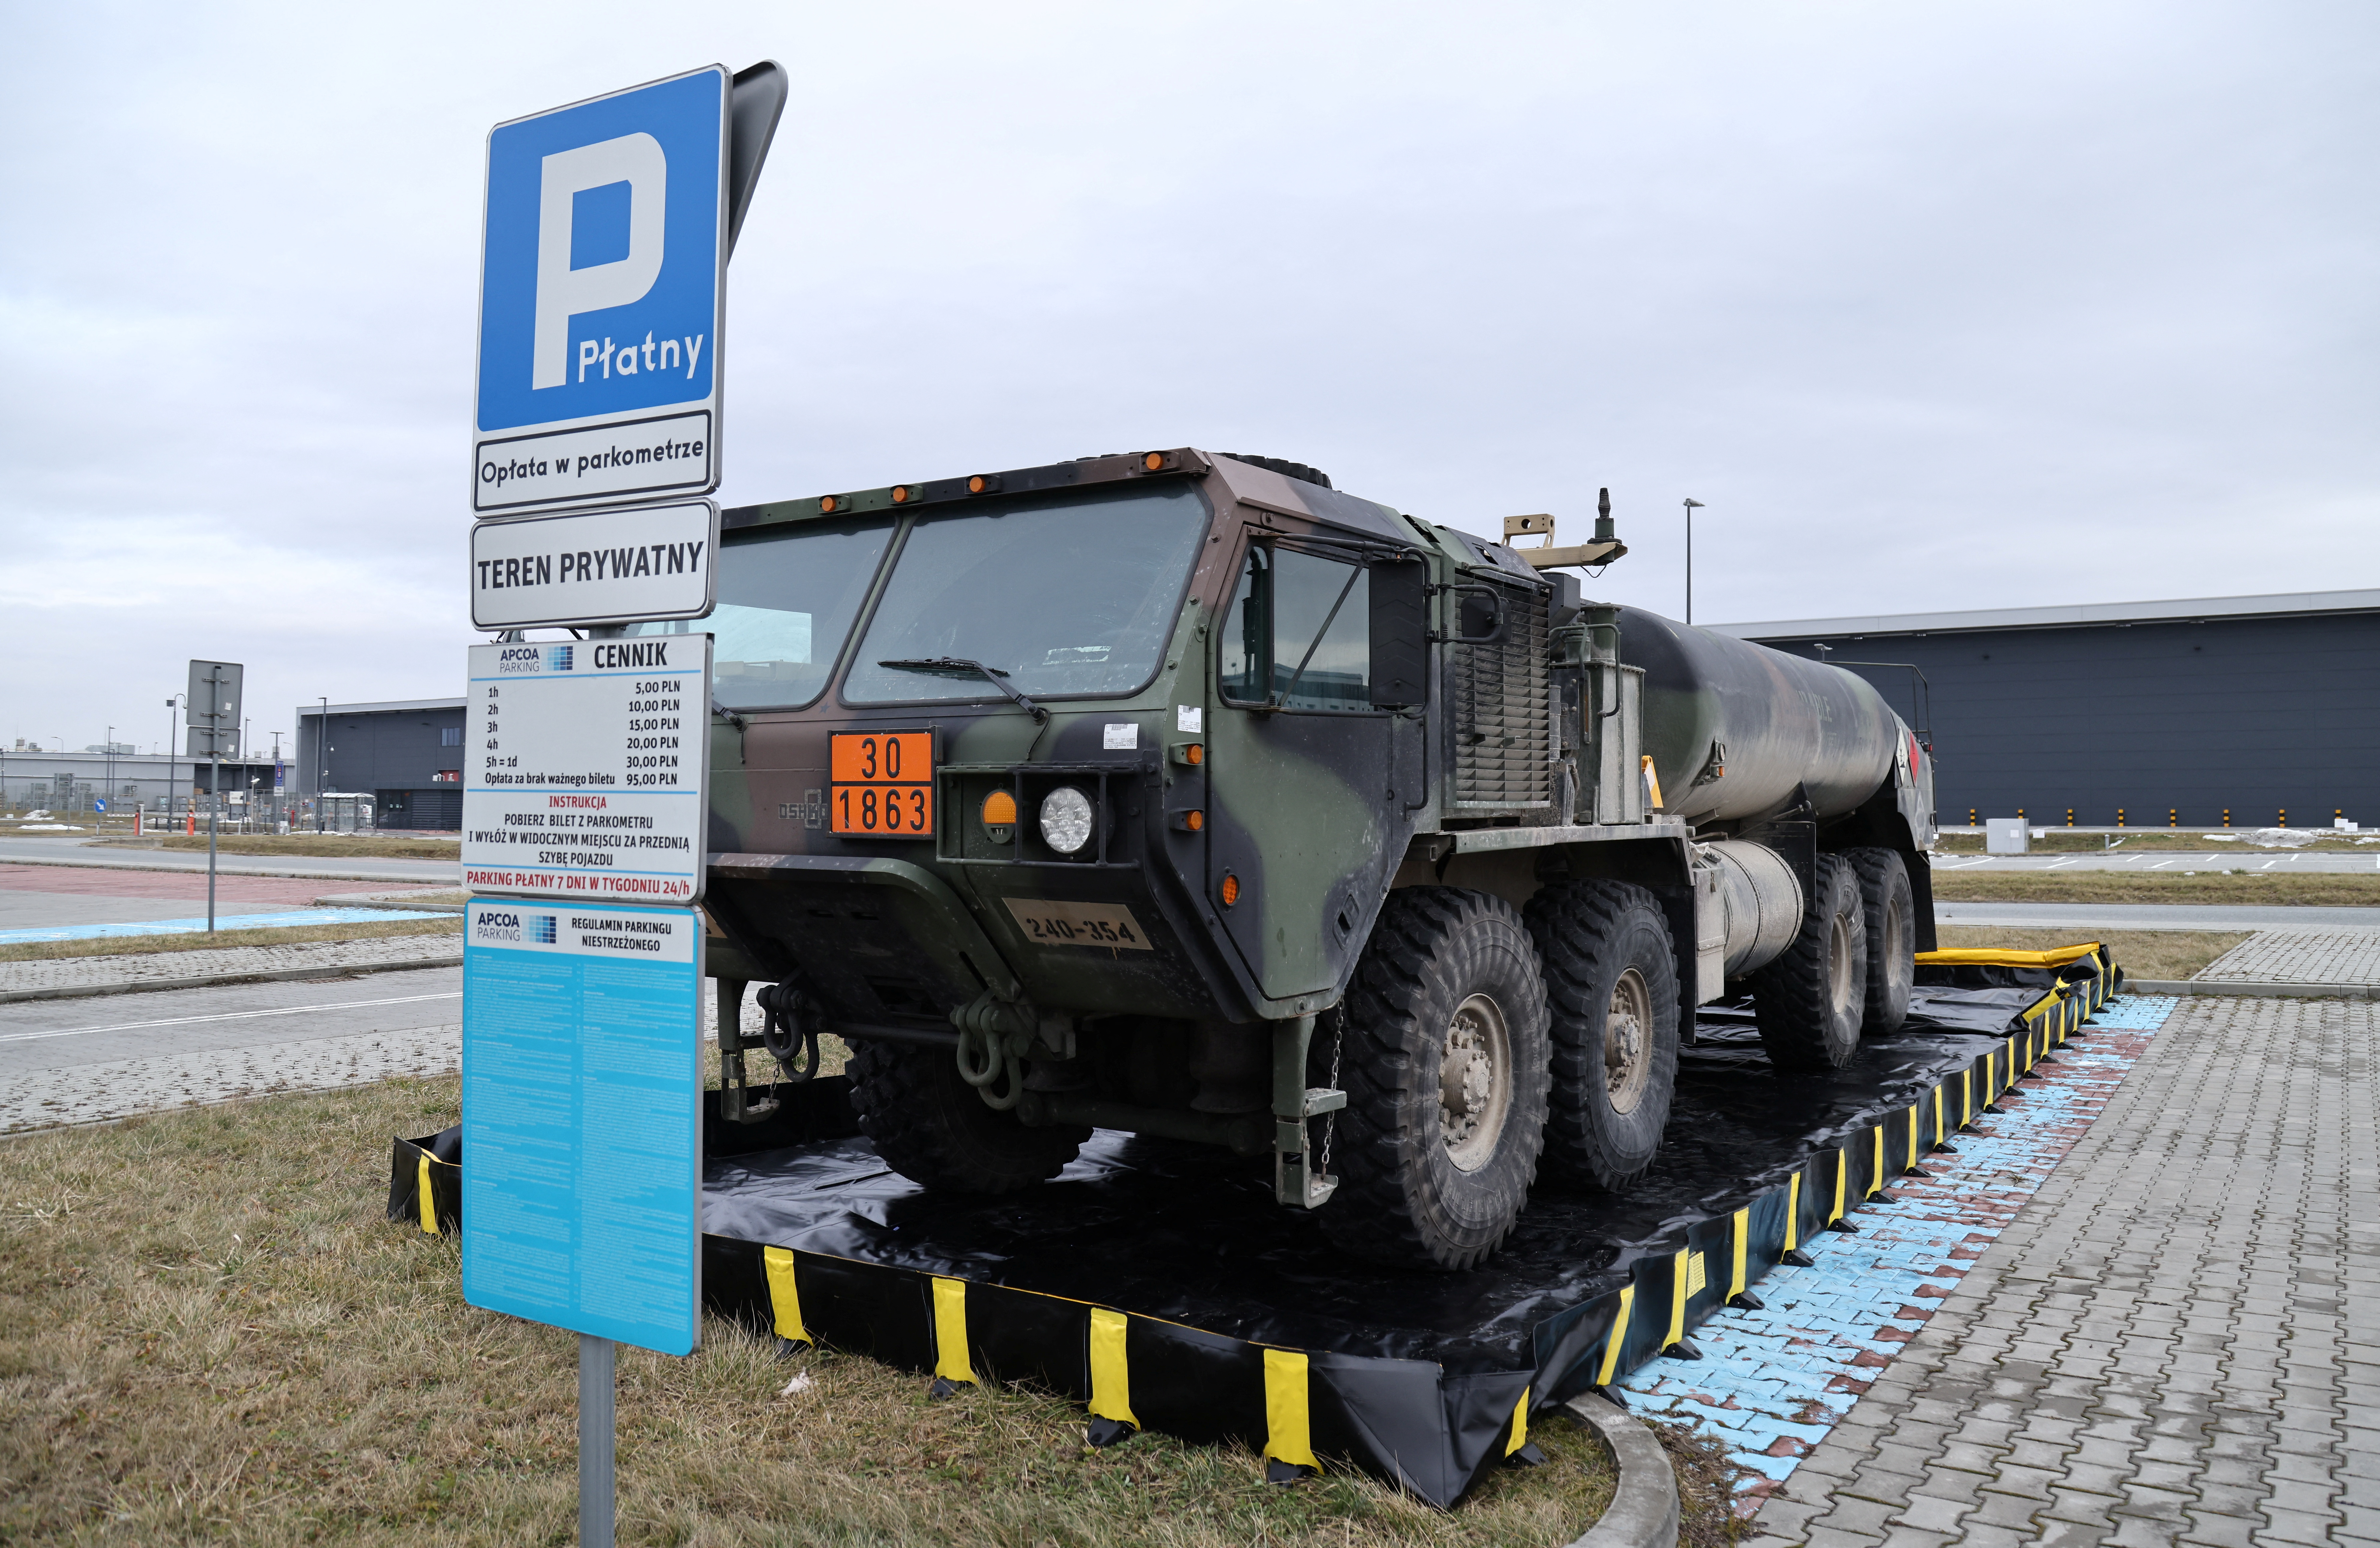 A U.S. Military vehicle is parked outside the G2A Arena near the Rzeszow-Jasionka Airport